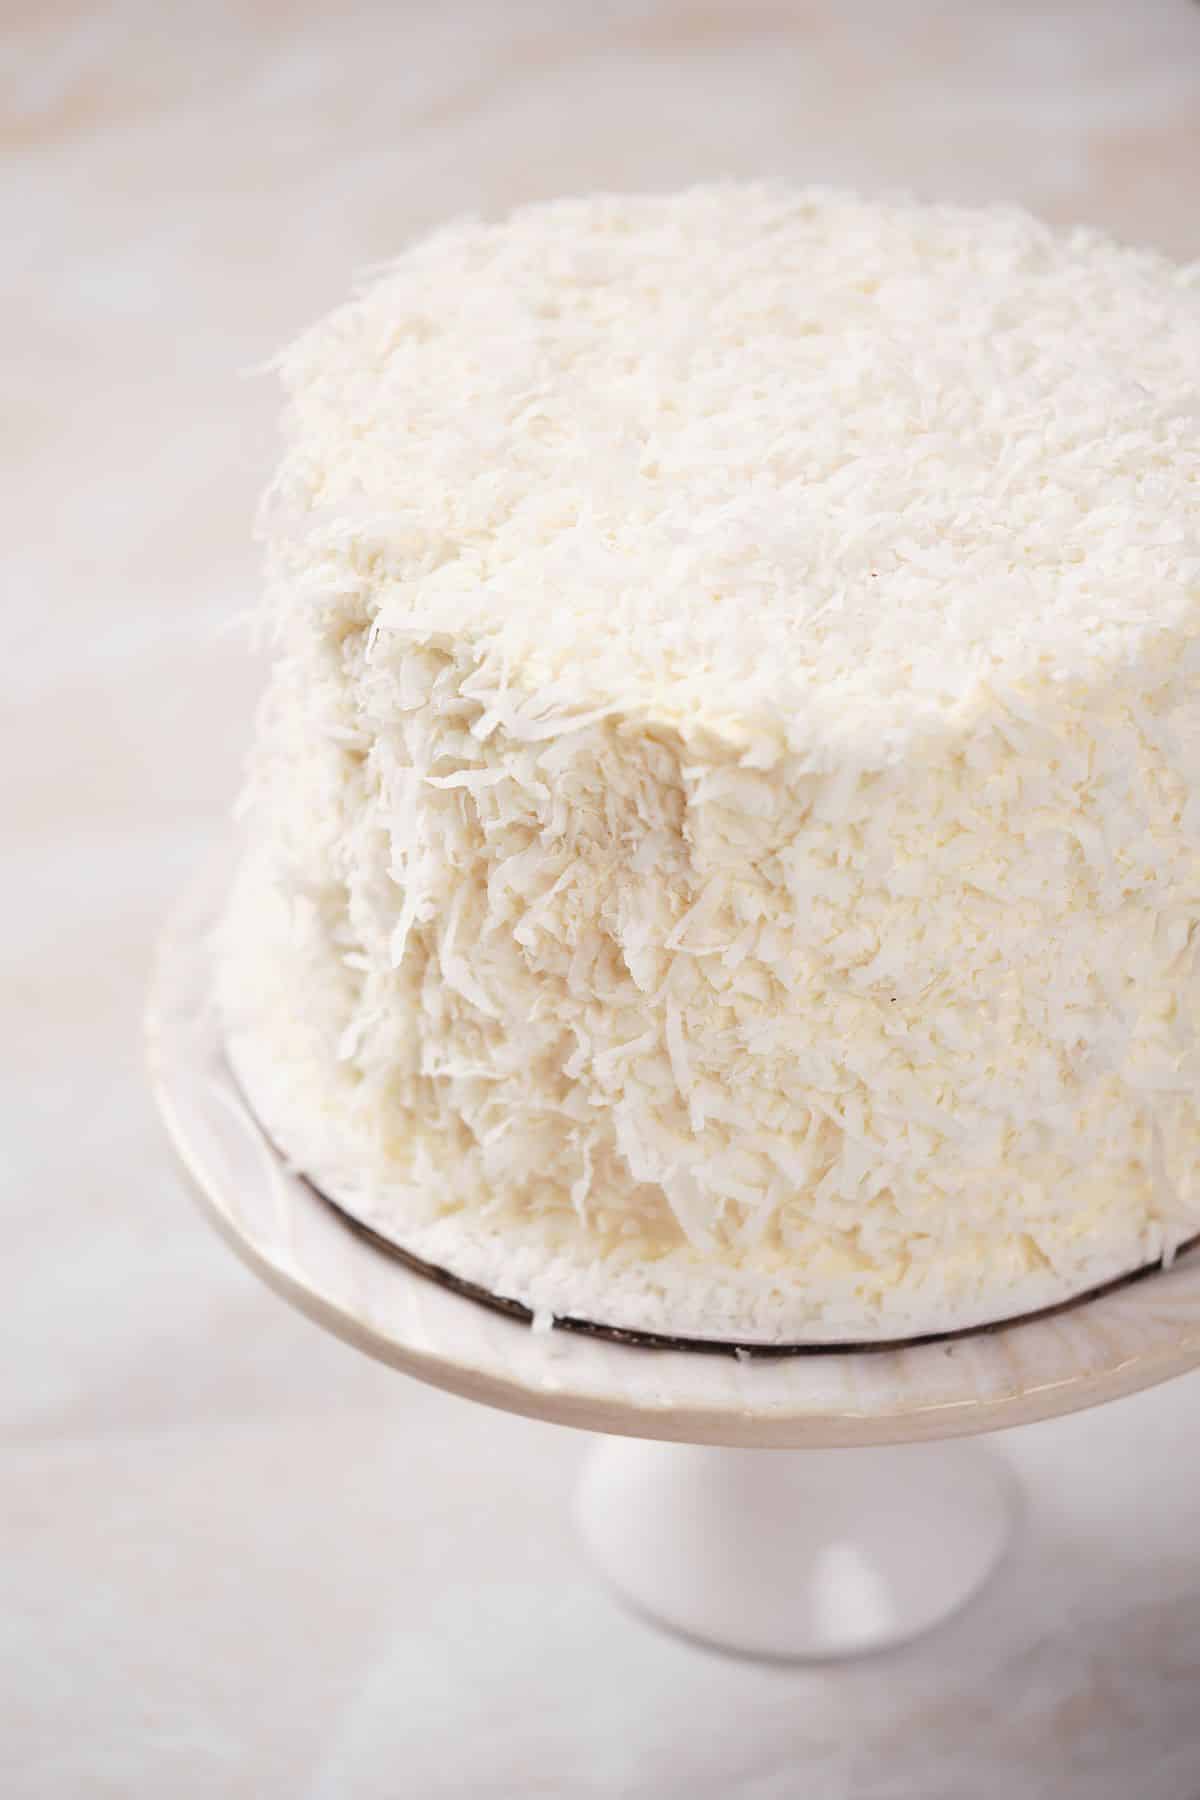 A coconut layer cake covered in coconut flakes.